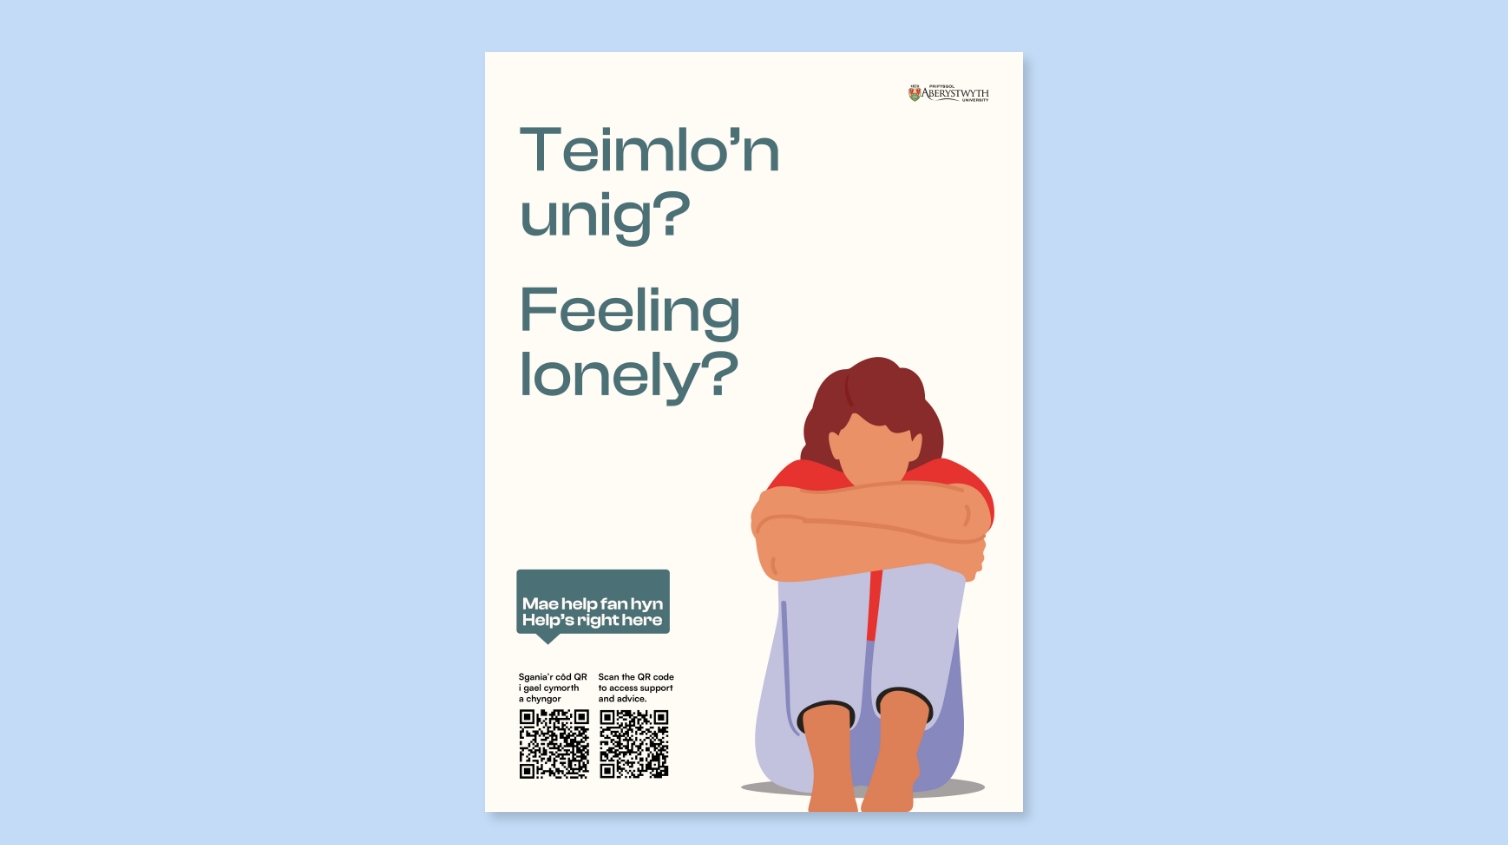 Poster about loneliness designed by a Brand Agency UK, with an image of a person hugging their knees and text in Welsh and English asking 